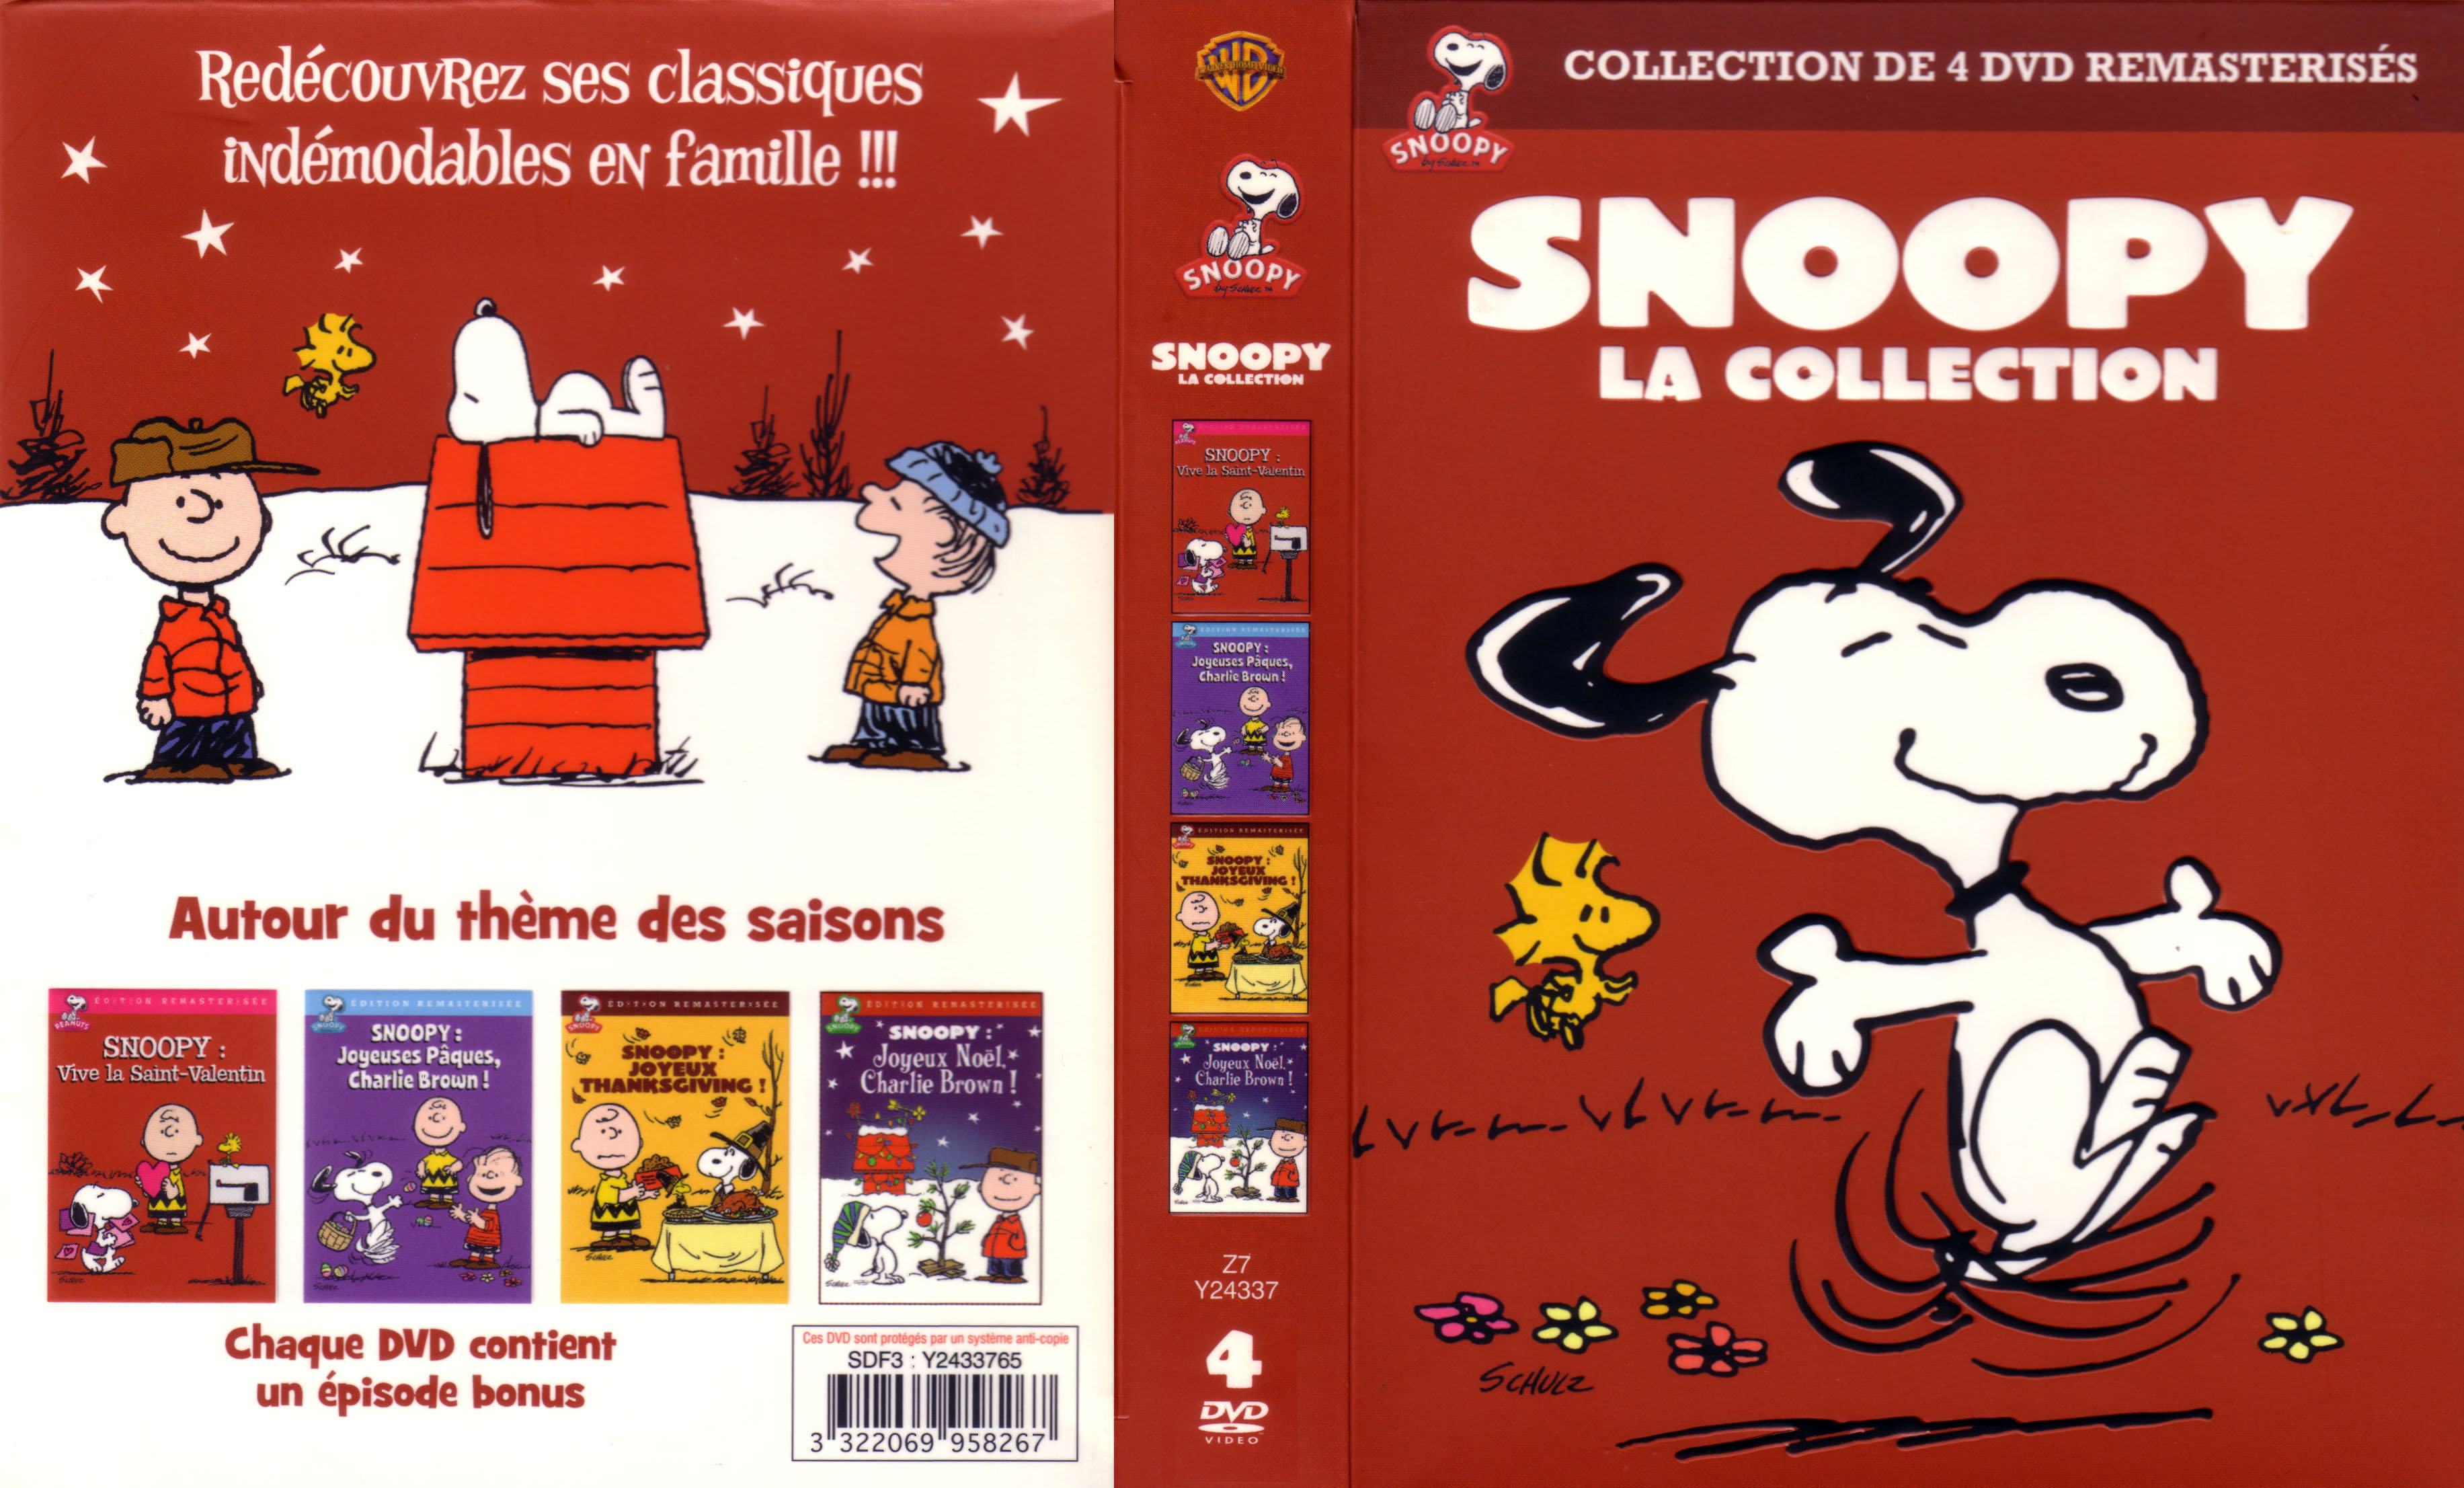 Jaquette DVD Snoopy la collection